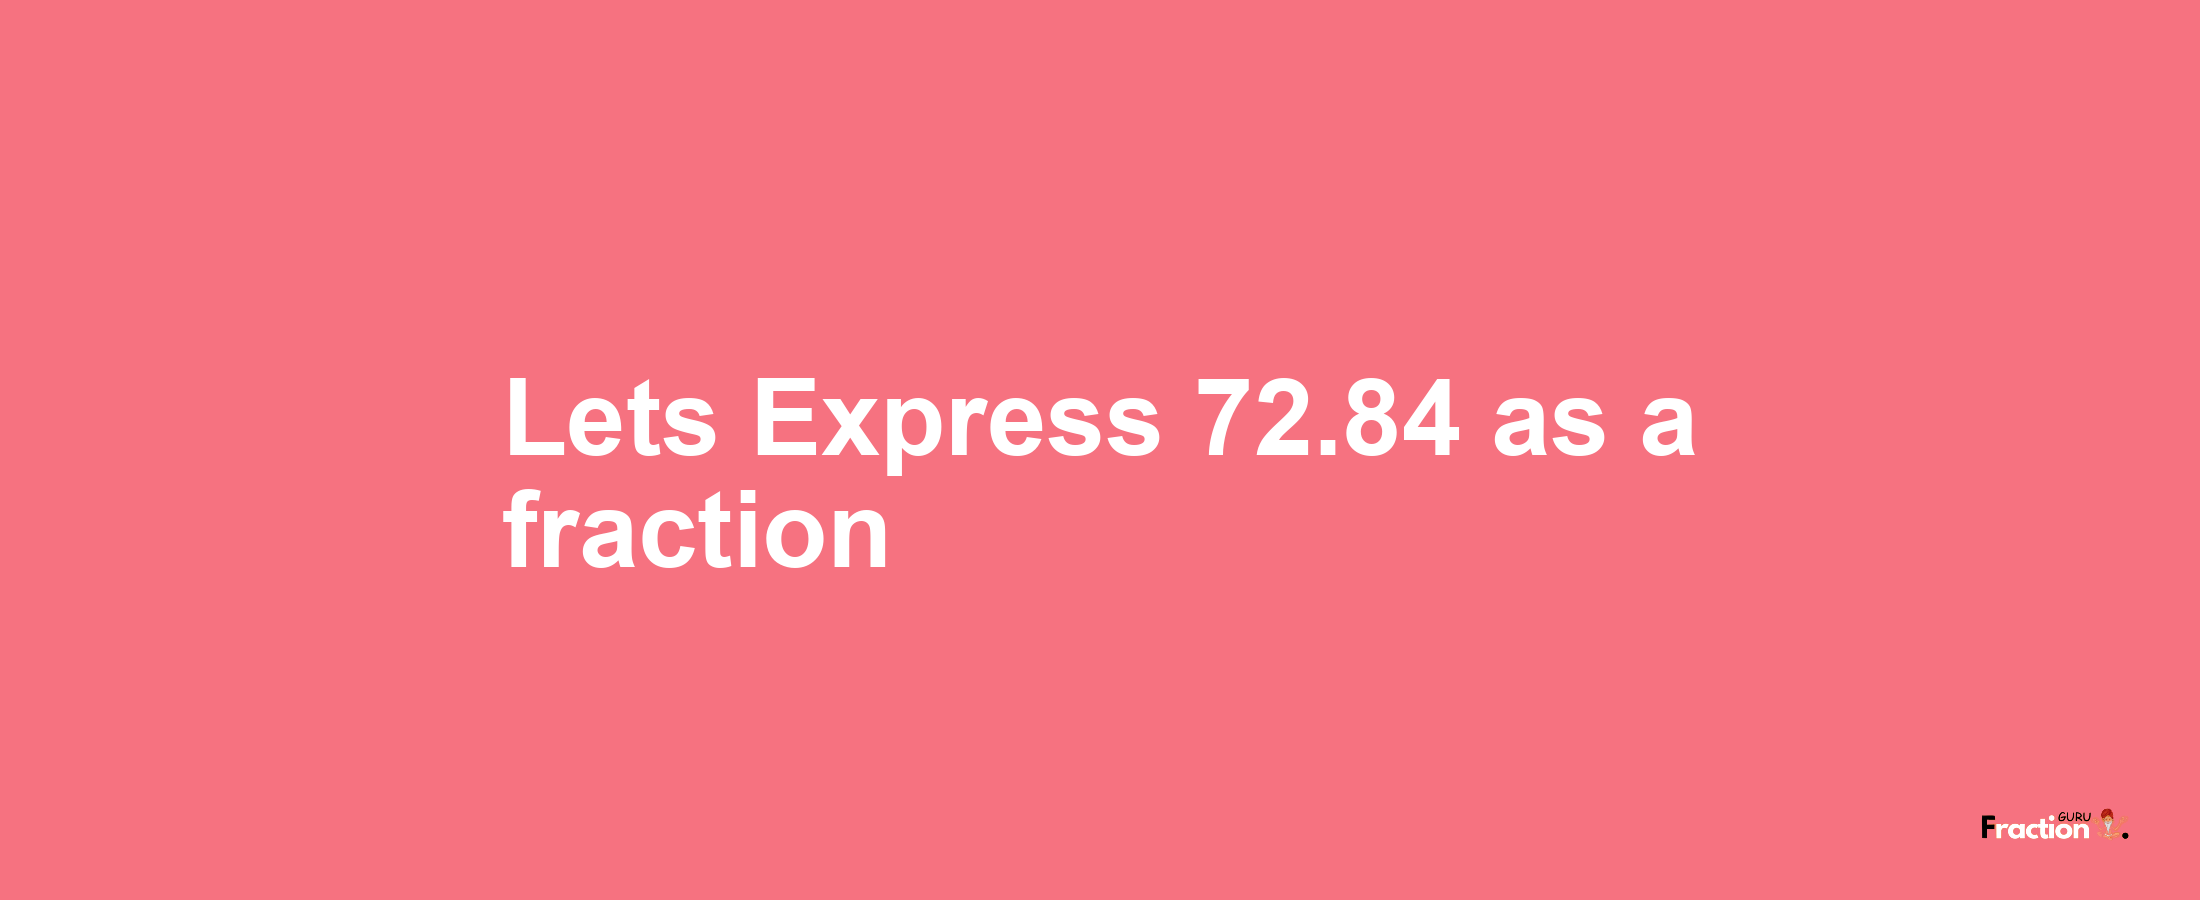 Lets Express 72.84 as afraction